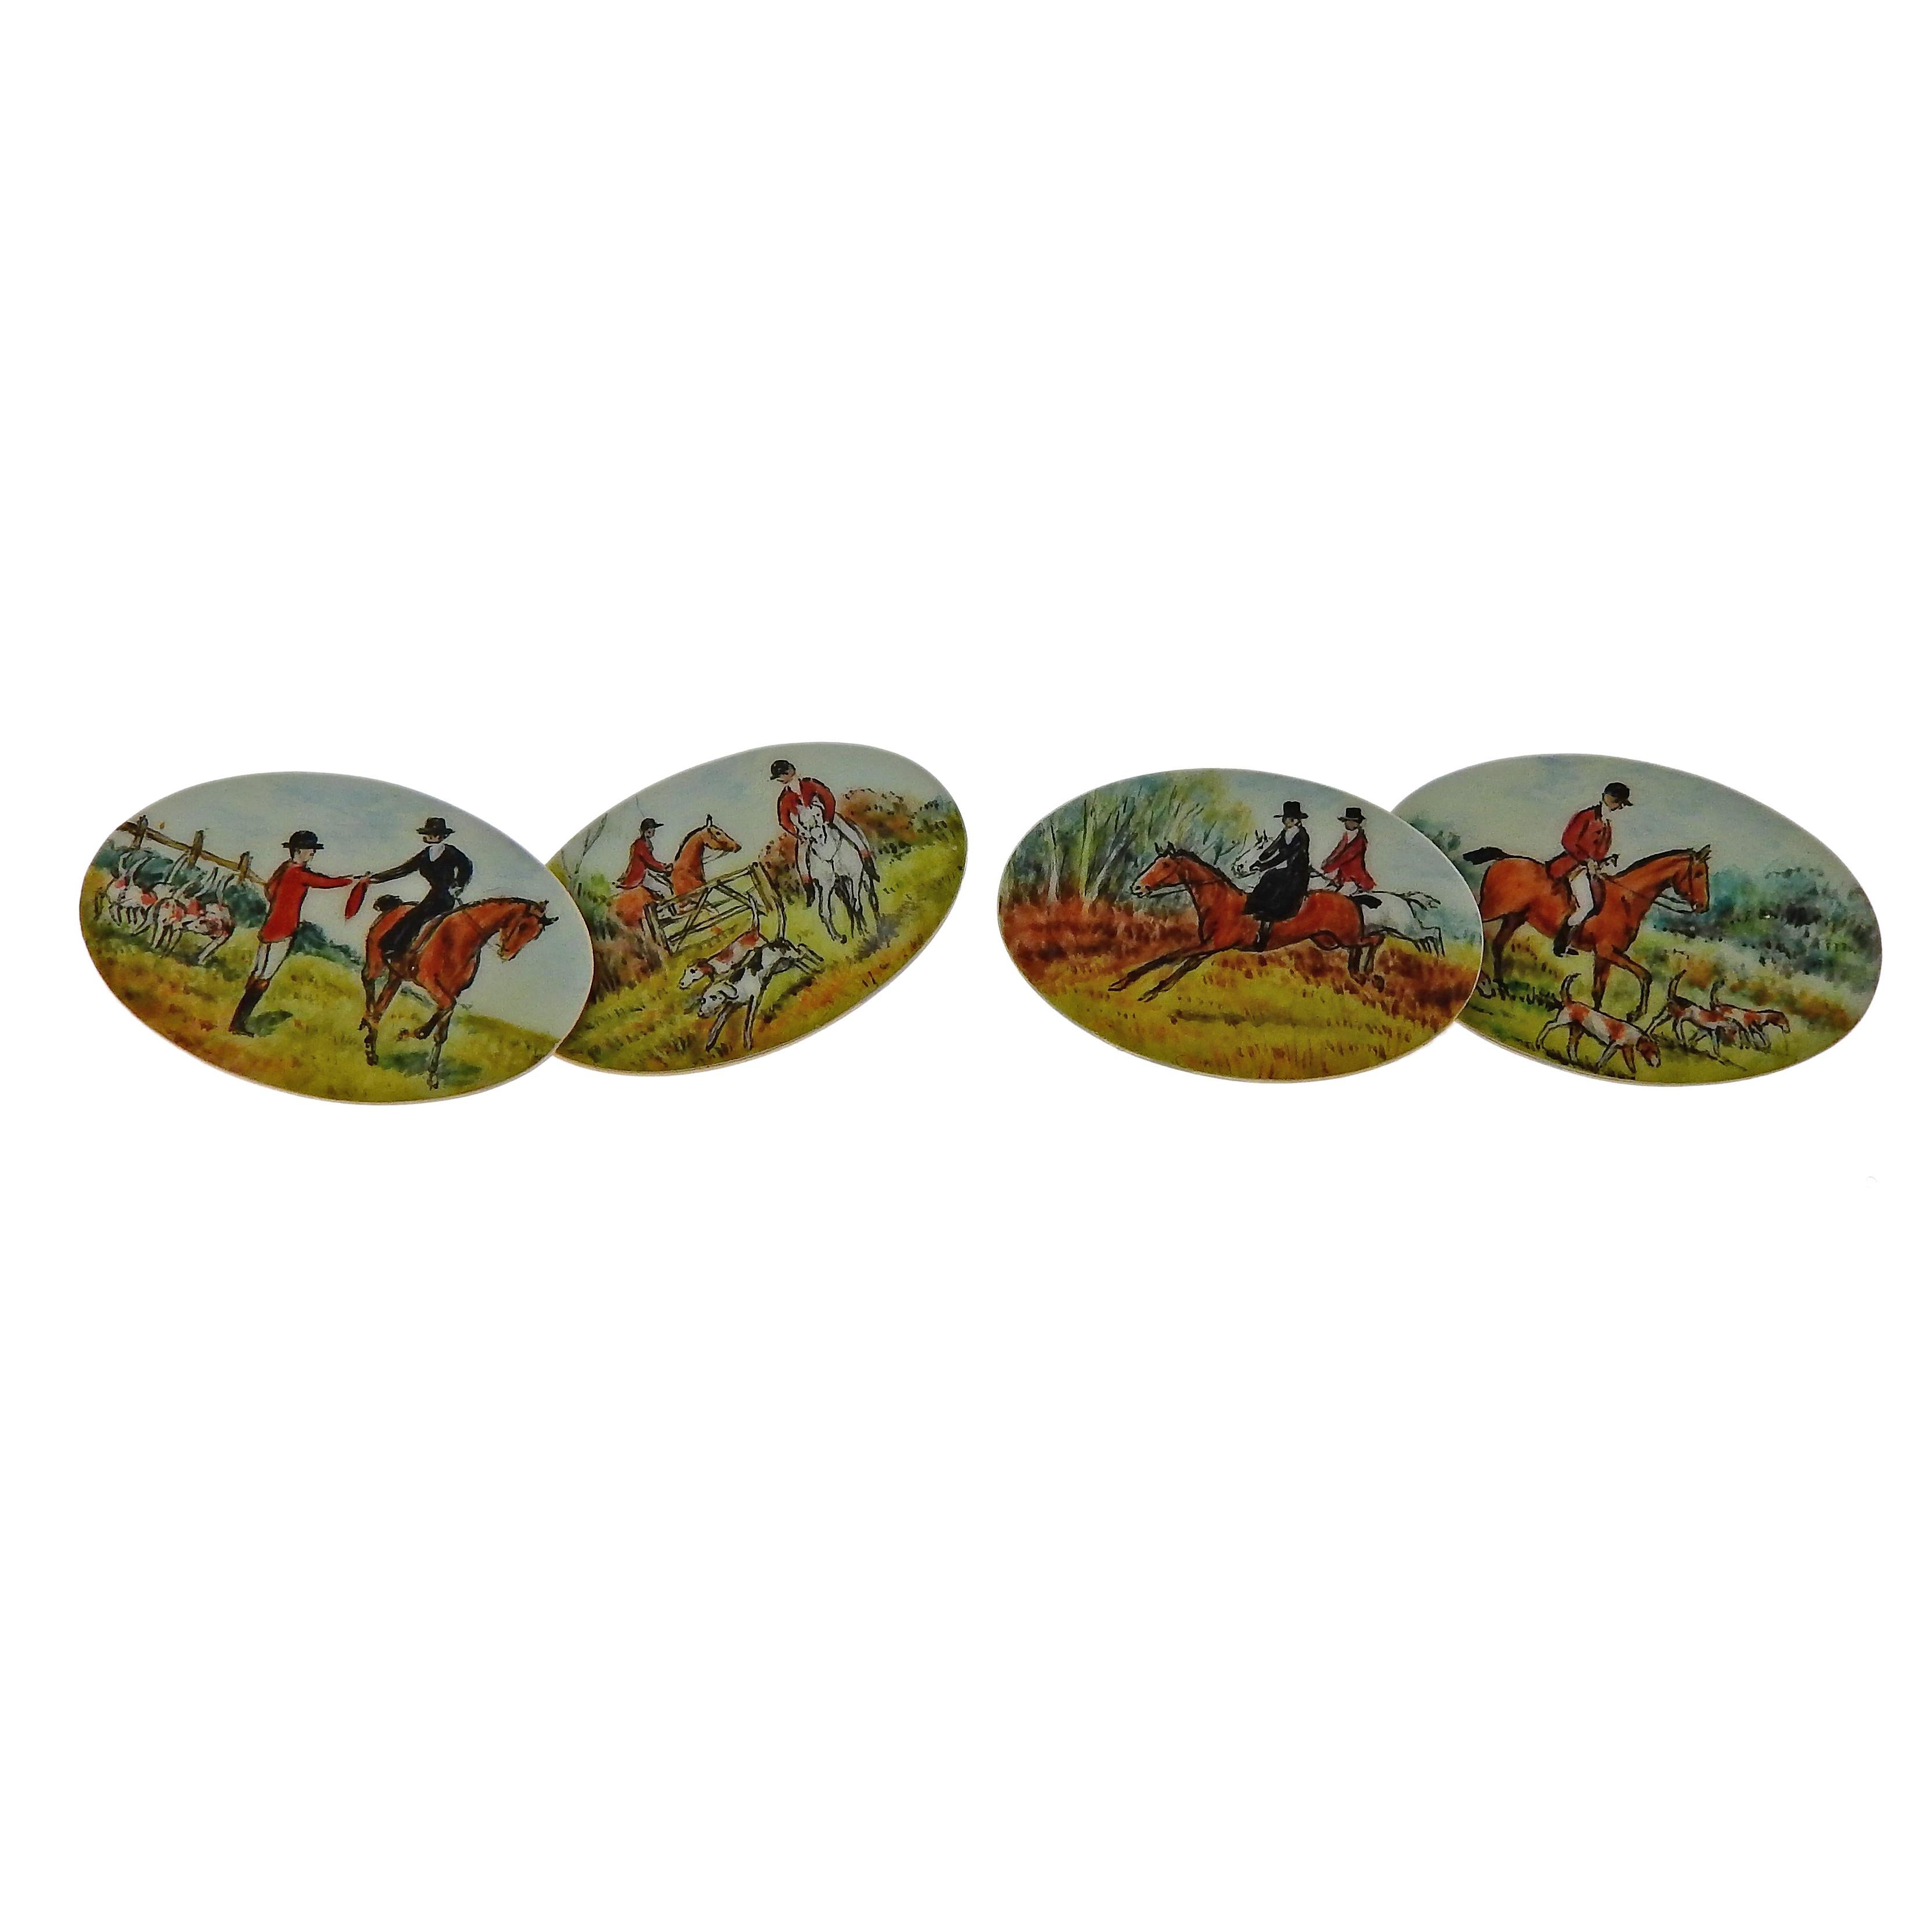 Pair of 18k gold oval English rafted cufflinks, depicting equestrian theme on enamel top. Each cufflink top is 20mm x 14mm. Marked with English hallmarks.  Weigh 8.3 grams.

SKU#C-00428